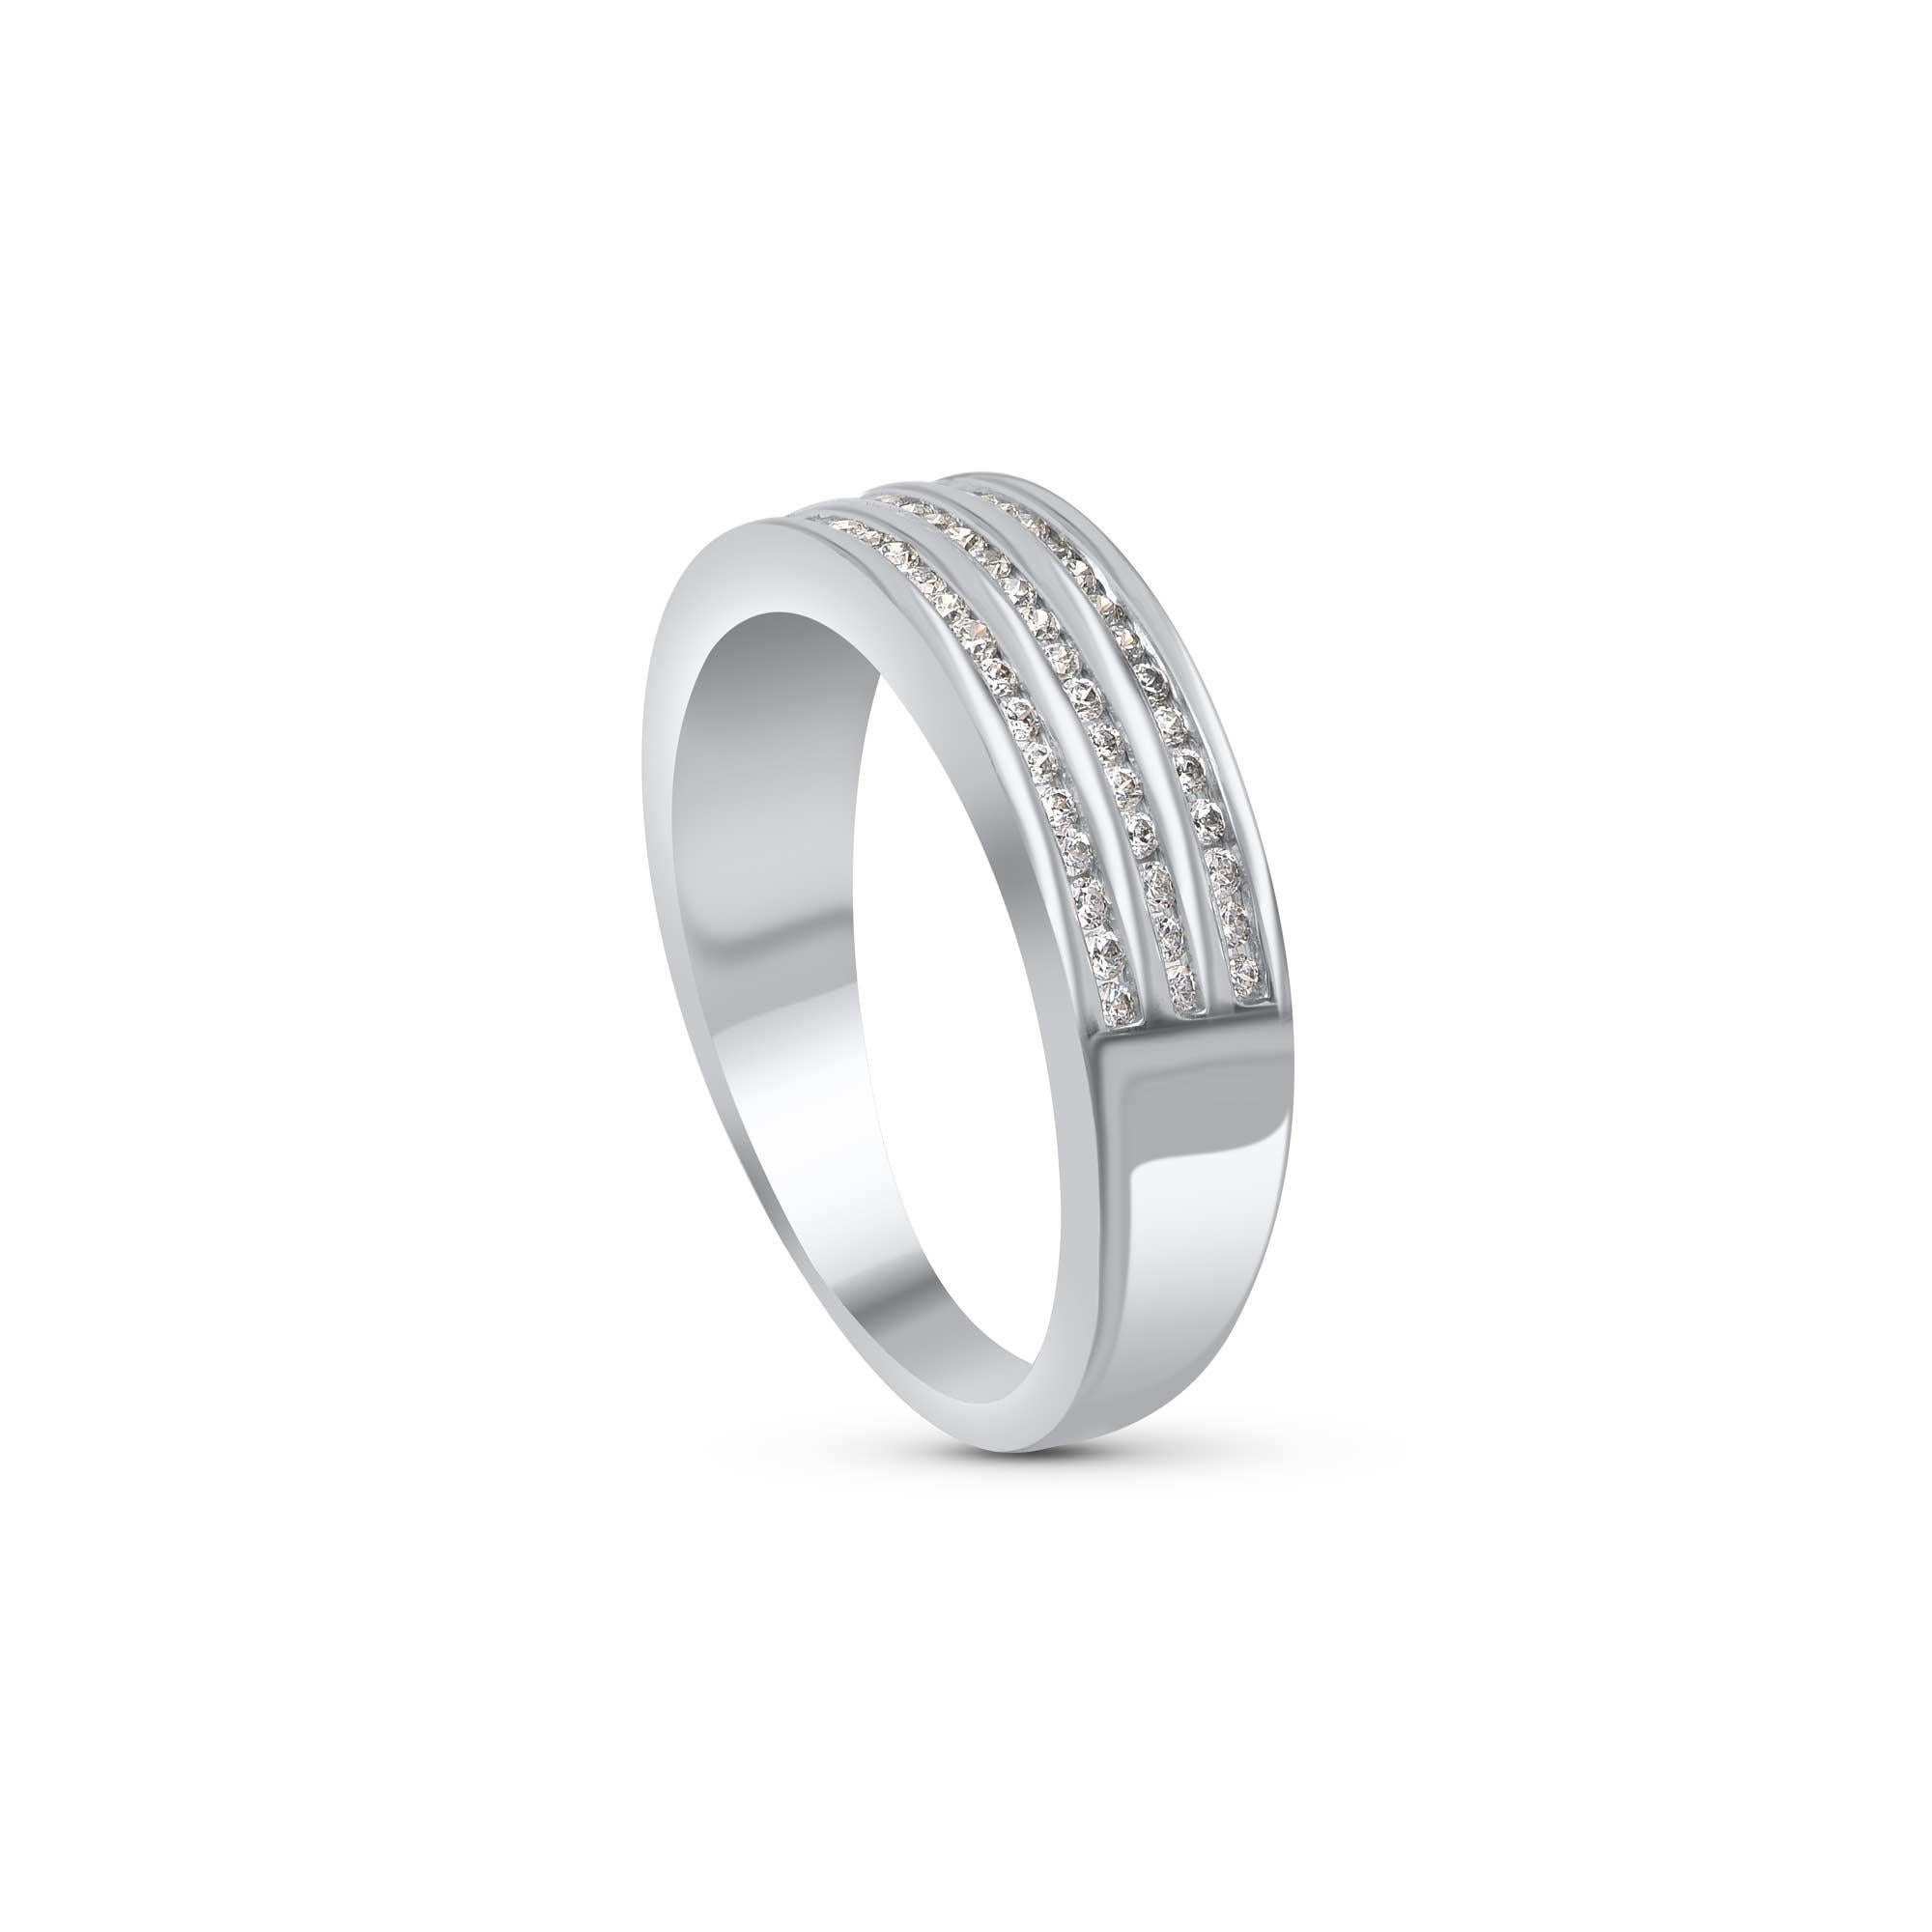 Bring charm to your look with this diamond Three Row wedding band Ring. This ring is beautifully crafted in 14 Karat white gold and embedded with 66 natural single cut diamonds in channel setting. Total diamond weight is 0.33 carat. The diamonds are